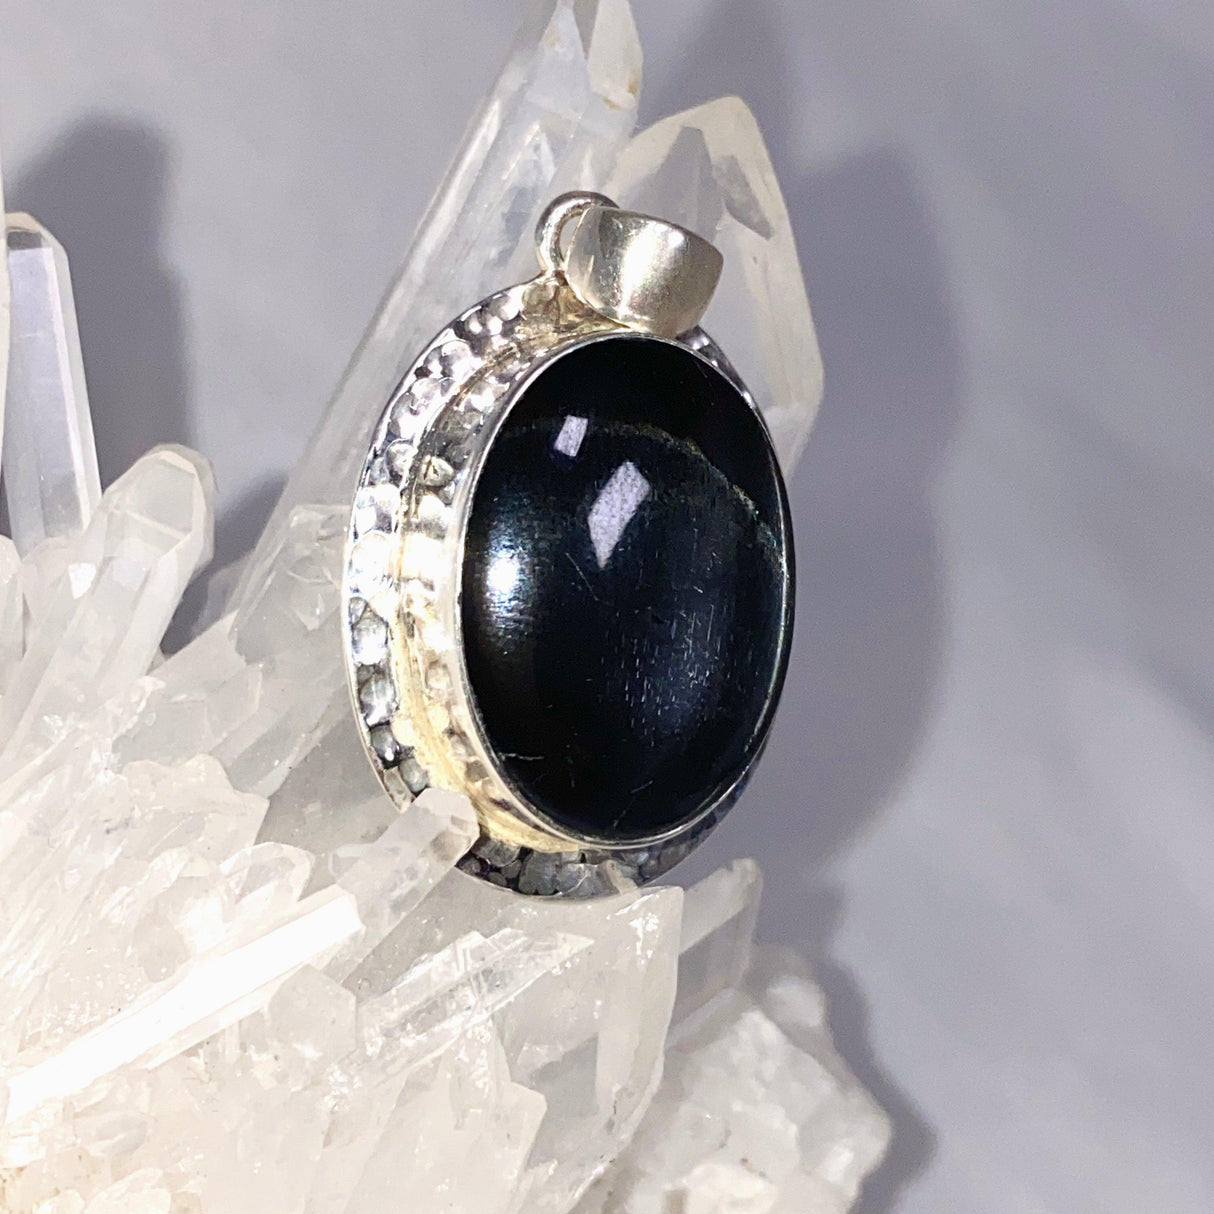 Black Star Diopside Oval Pendant in a Hammered Setting KPGJ4477 - Nature's Magick